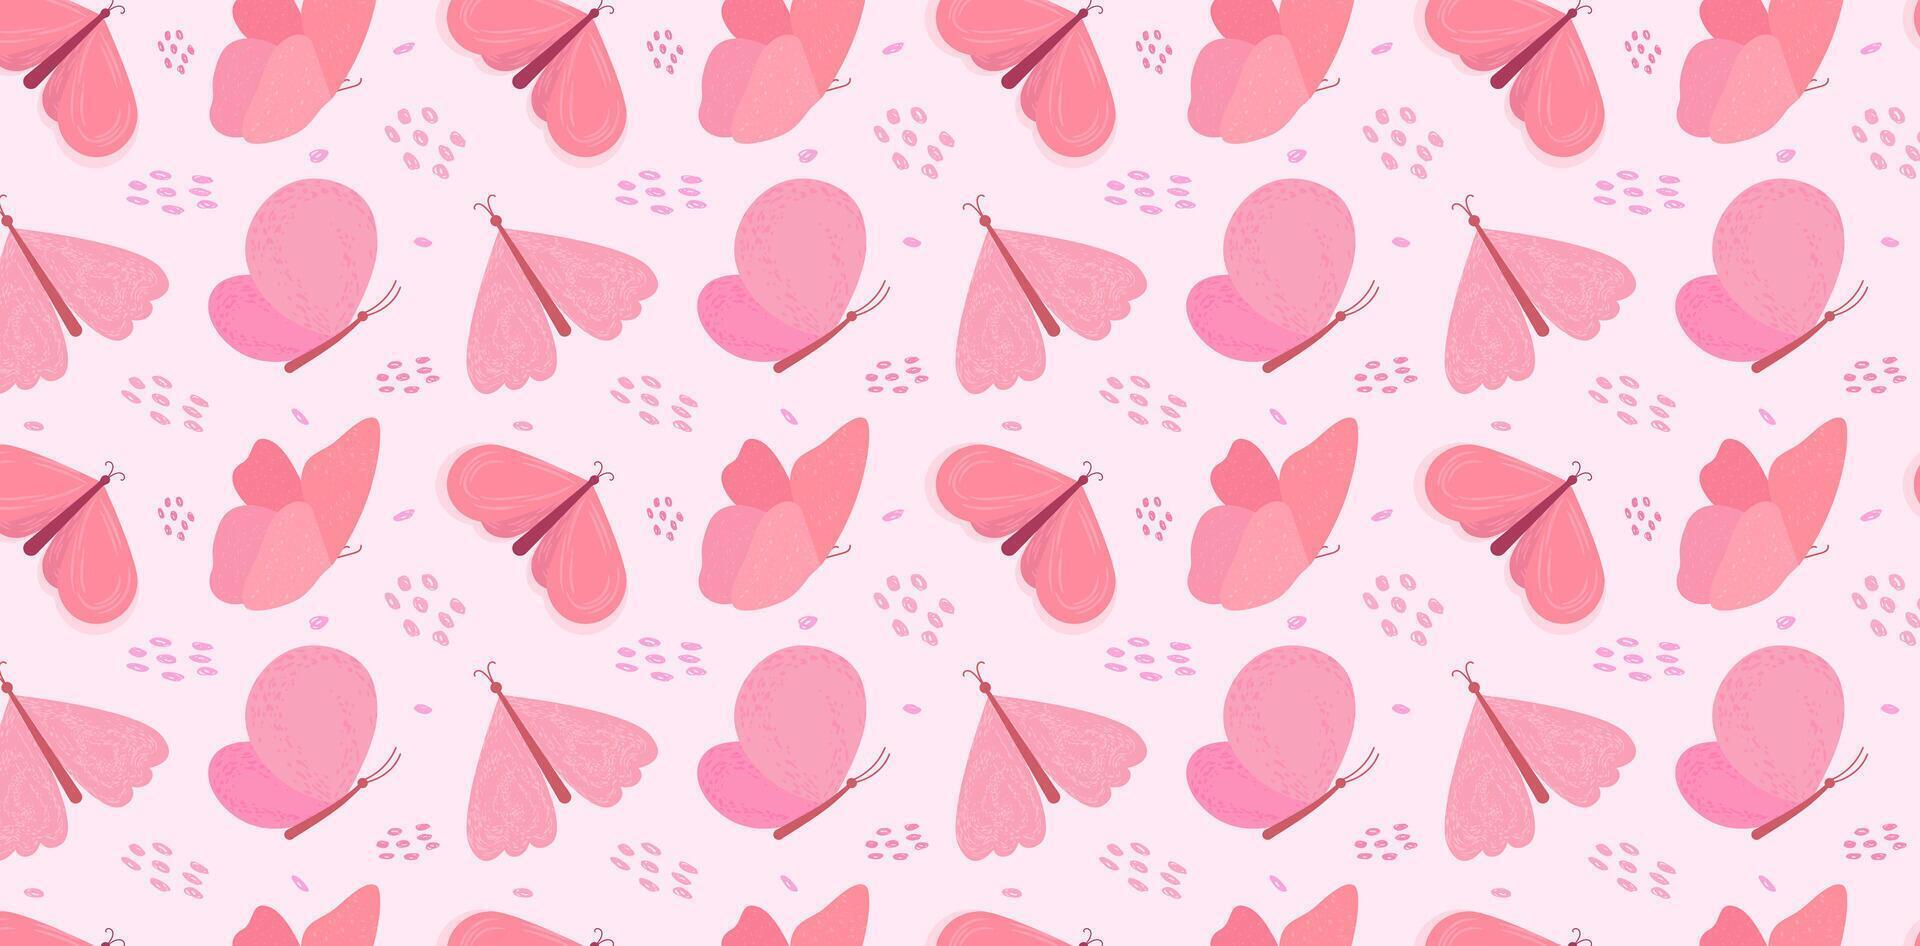 Spring pattern with pink butterflies. Seamless pink pattern with butterflies. Background for spring banners, design templates, etc. Concept of spring and mother's day. Vector illustration